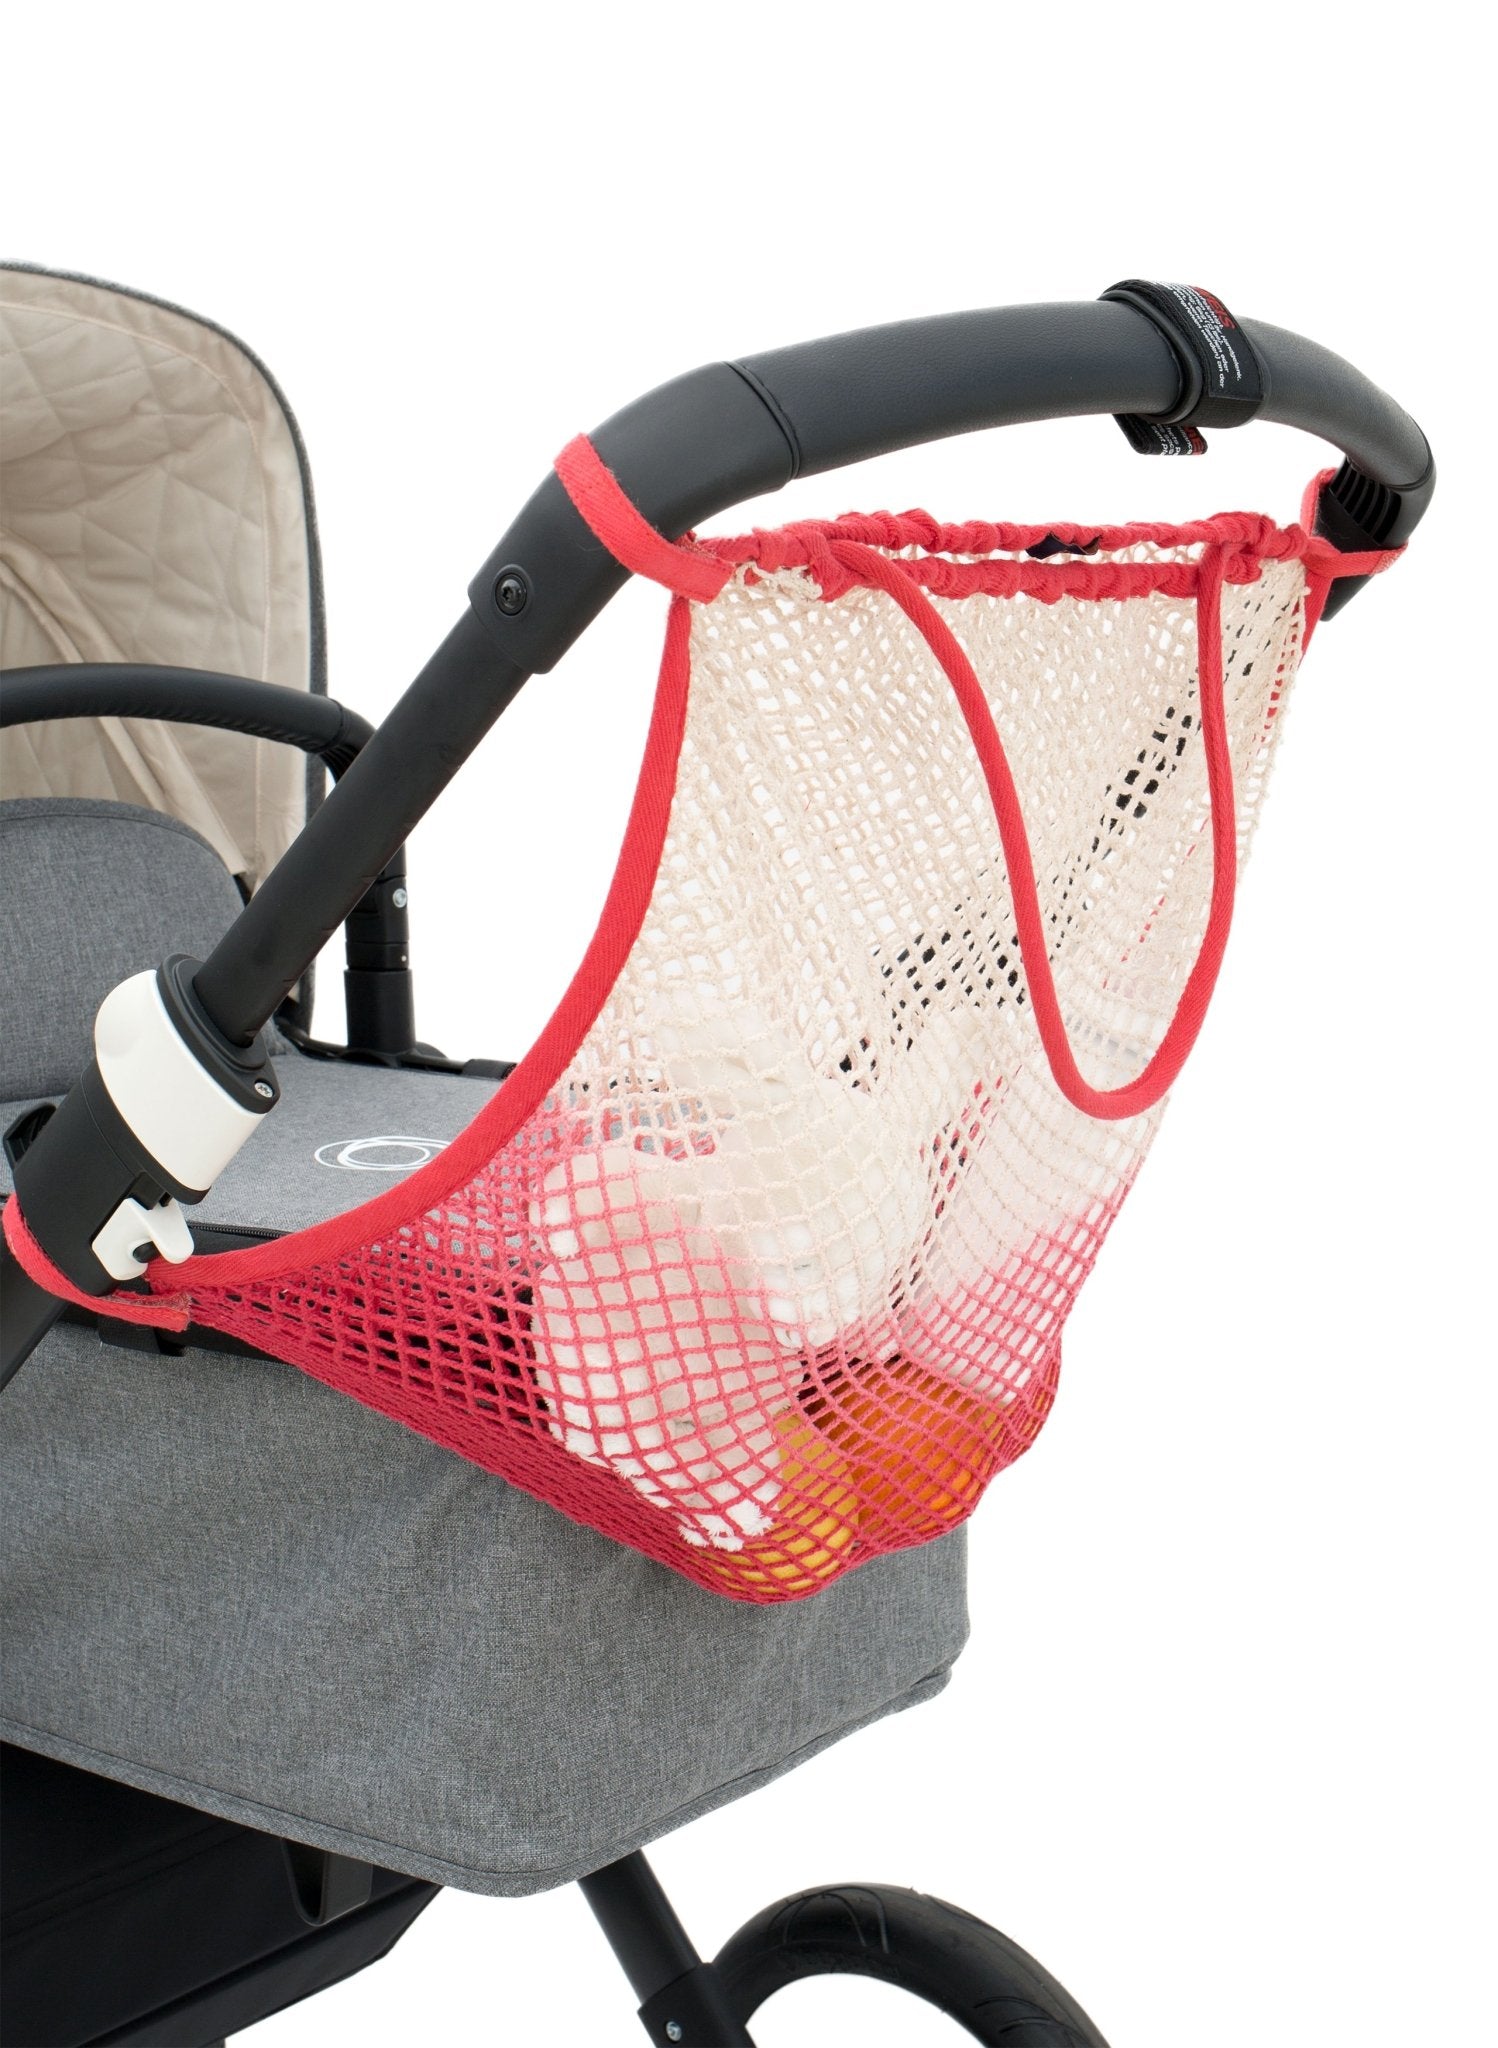 Stroller Net - Paw Paw - Mums and Bumps